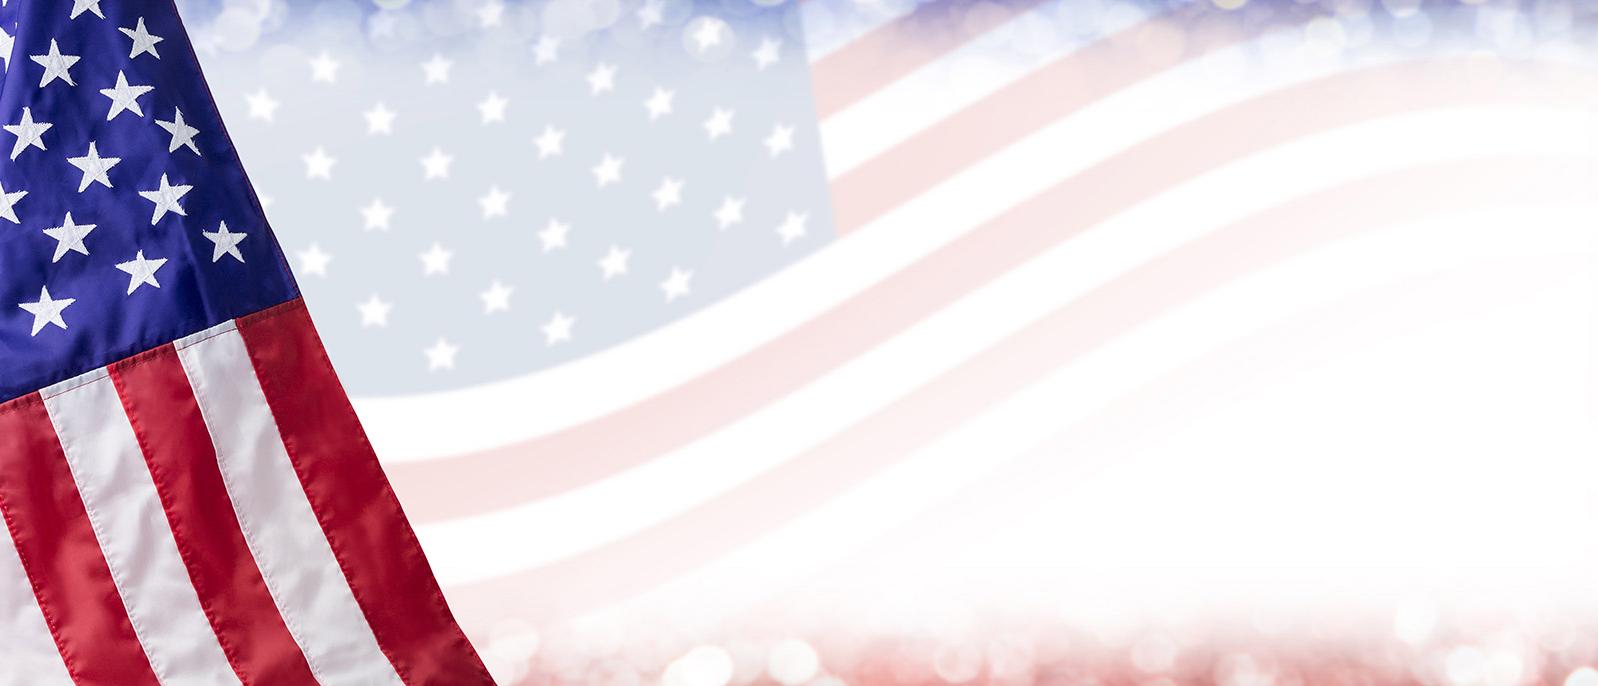 Background Image | Faded American Flag